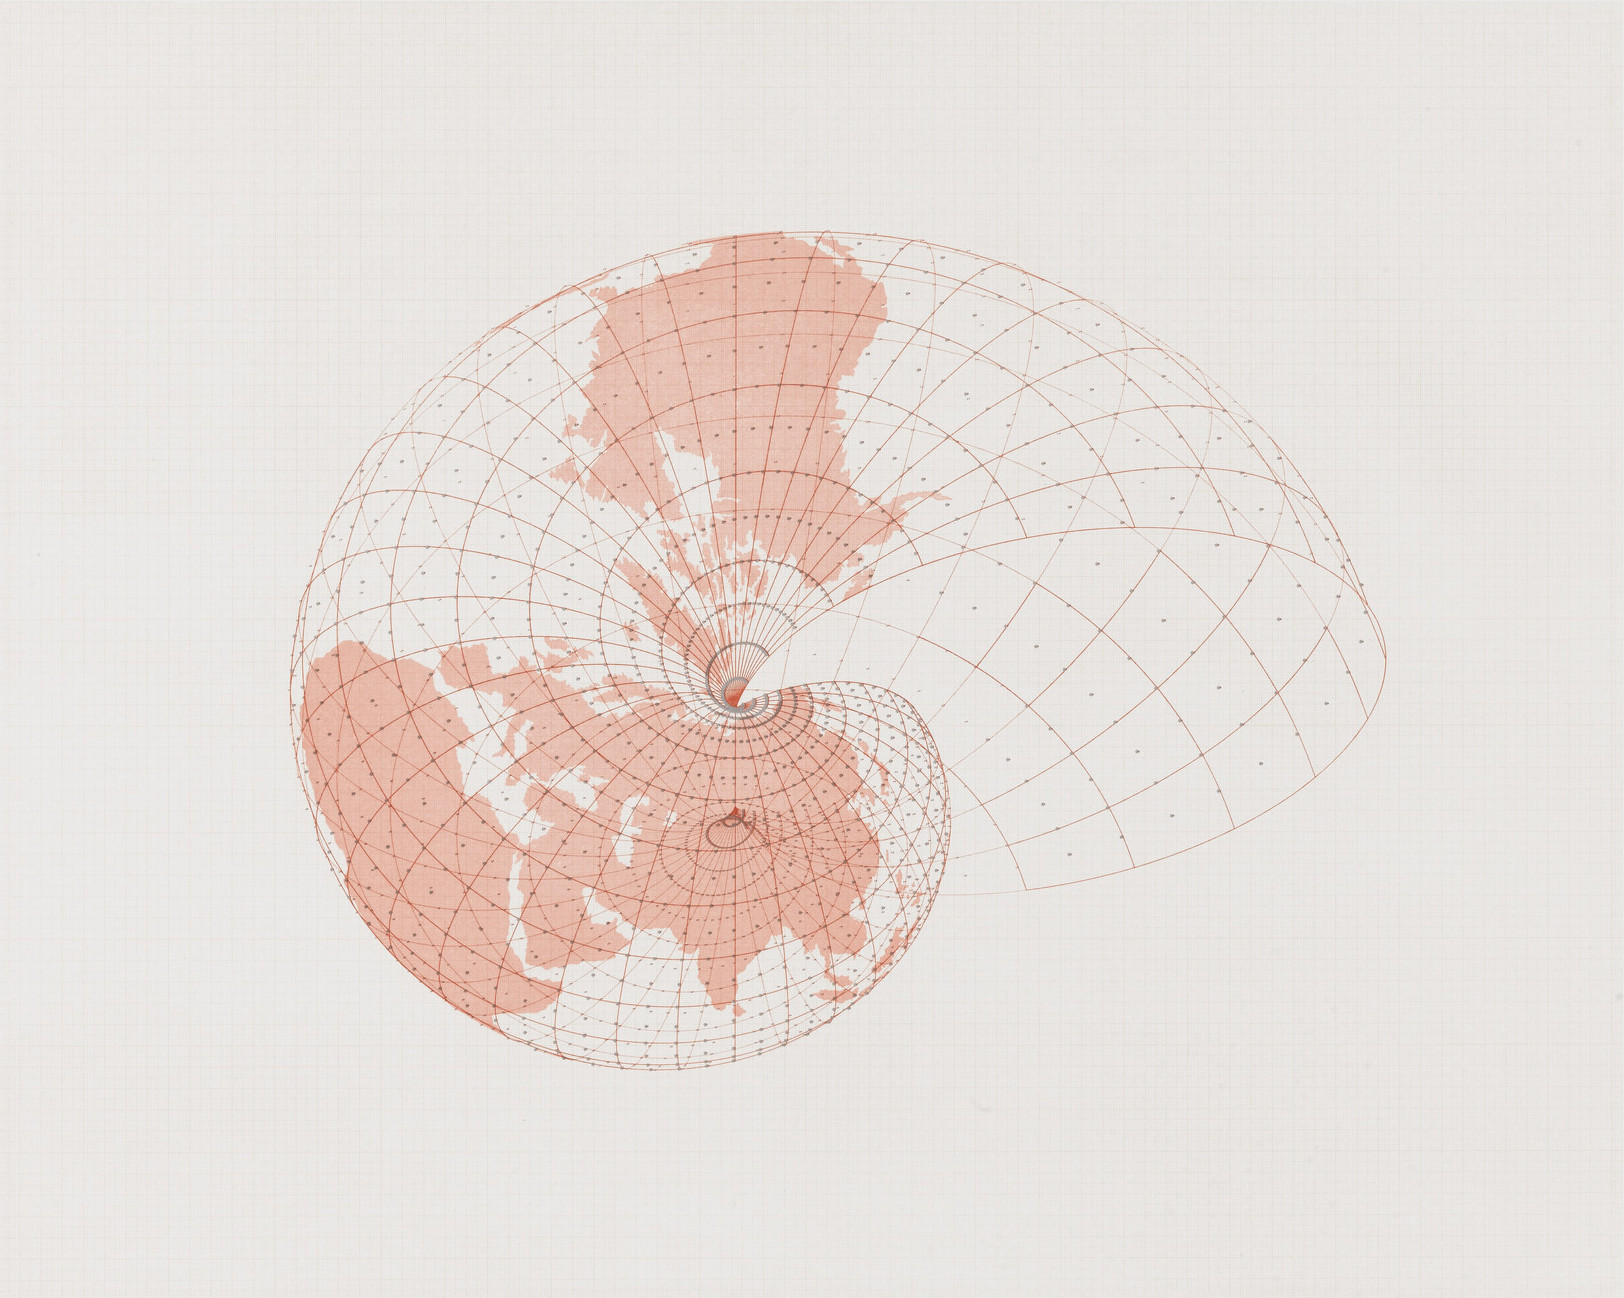 Map of the world projected onto a three dimensional grid in the form of a snail shell (spiraling cylinder)